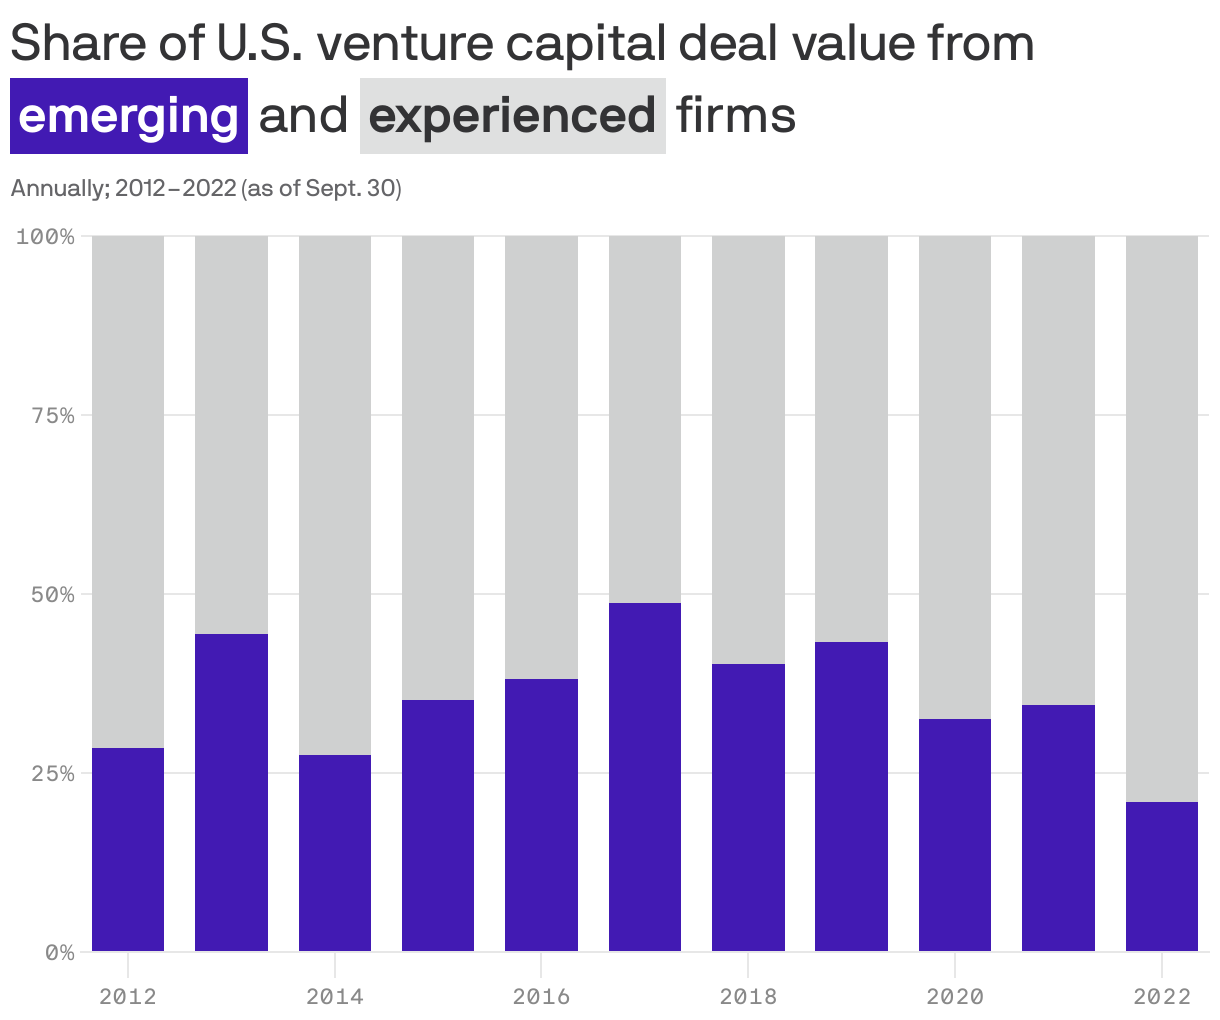 Share of U.S. venture capital deal value from <span style="color: white; background-color:#421ab3; padding: 2px 4px; display: inline-block; margin: 0px; white-space: nowrap; font-weight: 900;">emerging</span> and <span style="color: #333335; background-color:#dfe0e0; padding: 2px 4px; display: inline-block; margin: 0px; white-space: nowrap; font-weight: 900;">experienced</span> firms